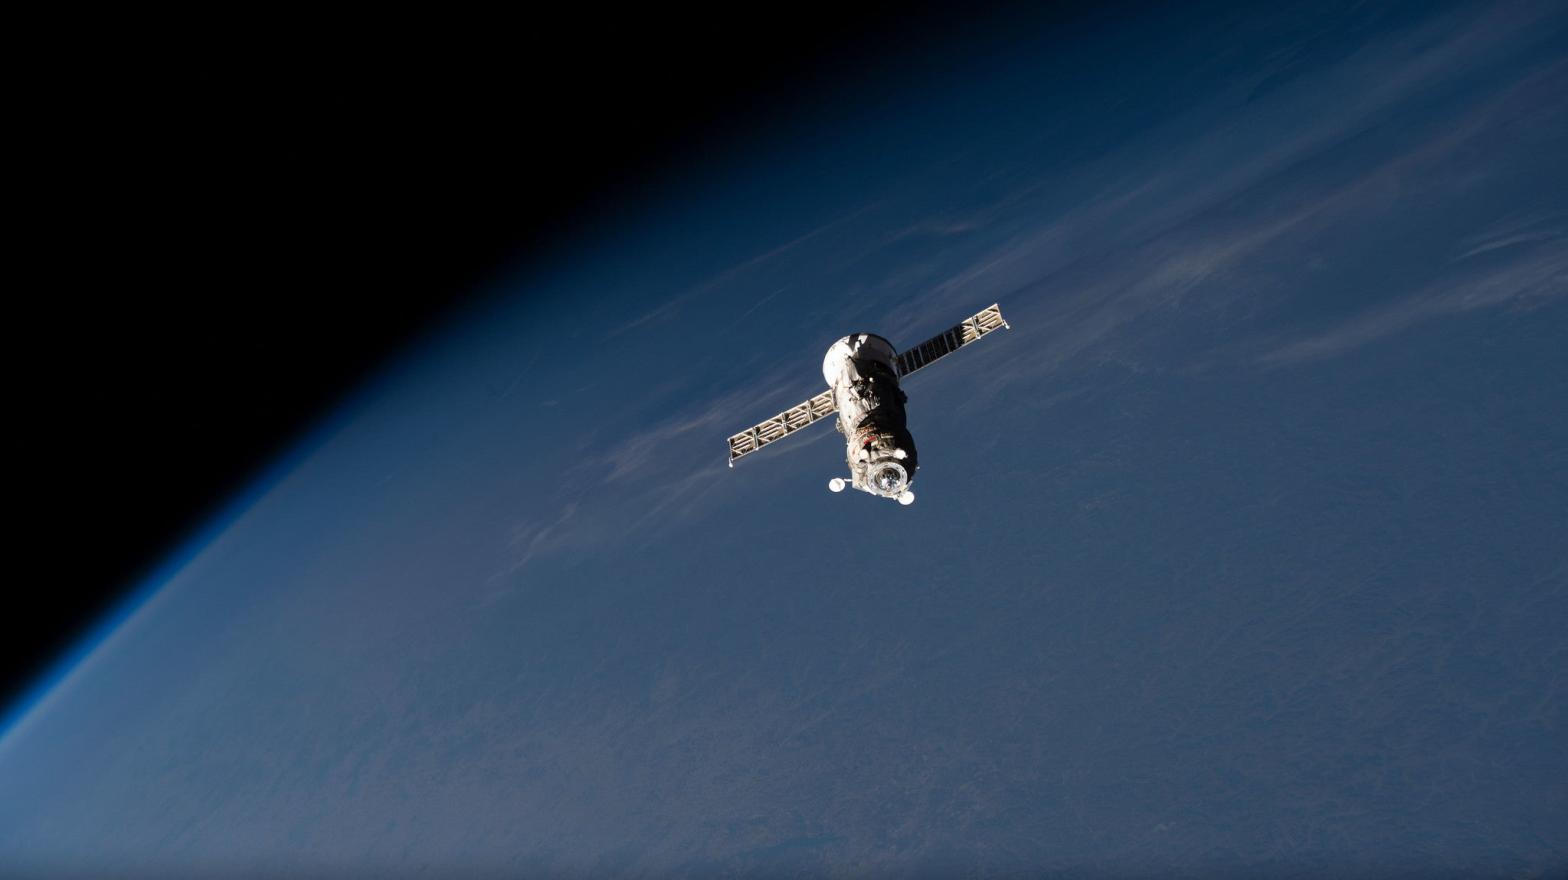 The ISS Progress 80 cargo spacecraft departing the space station on October 23, 2022. (Photo: NASA)